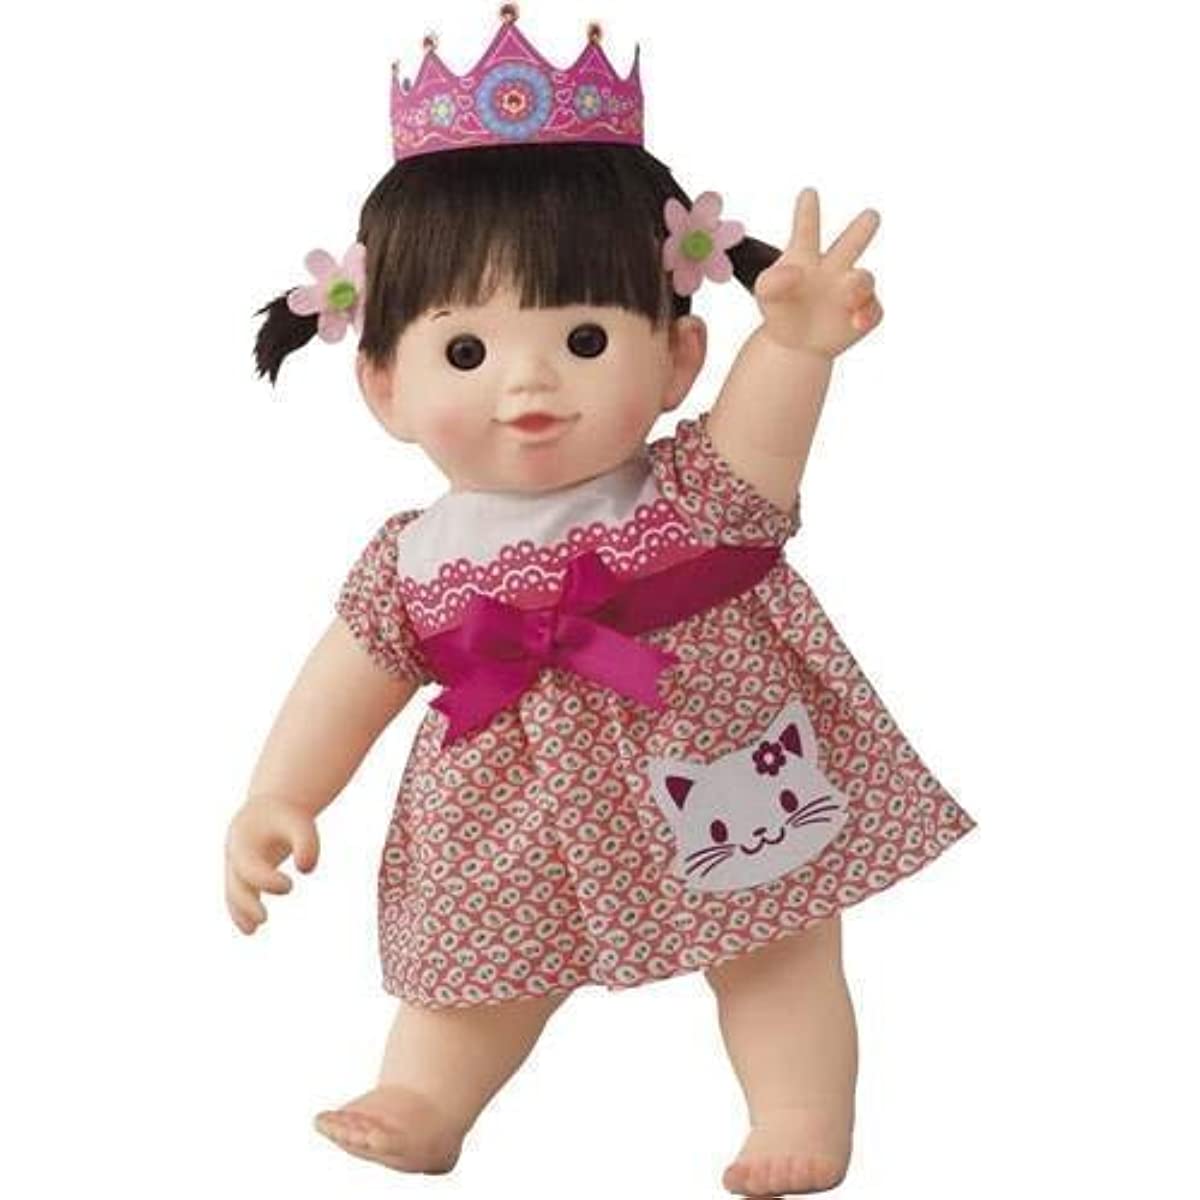 Matching crown with Popo-chan 2-year-old skin soft doll Popo-chan